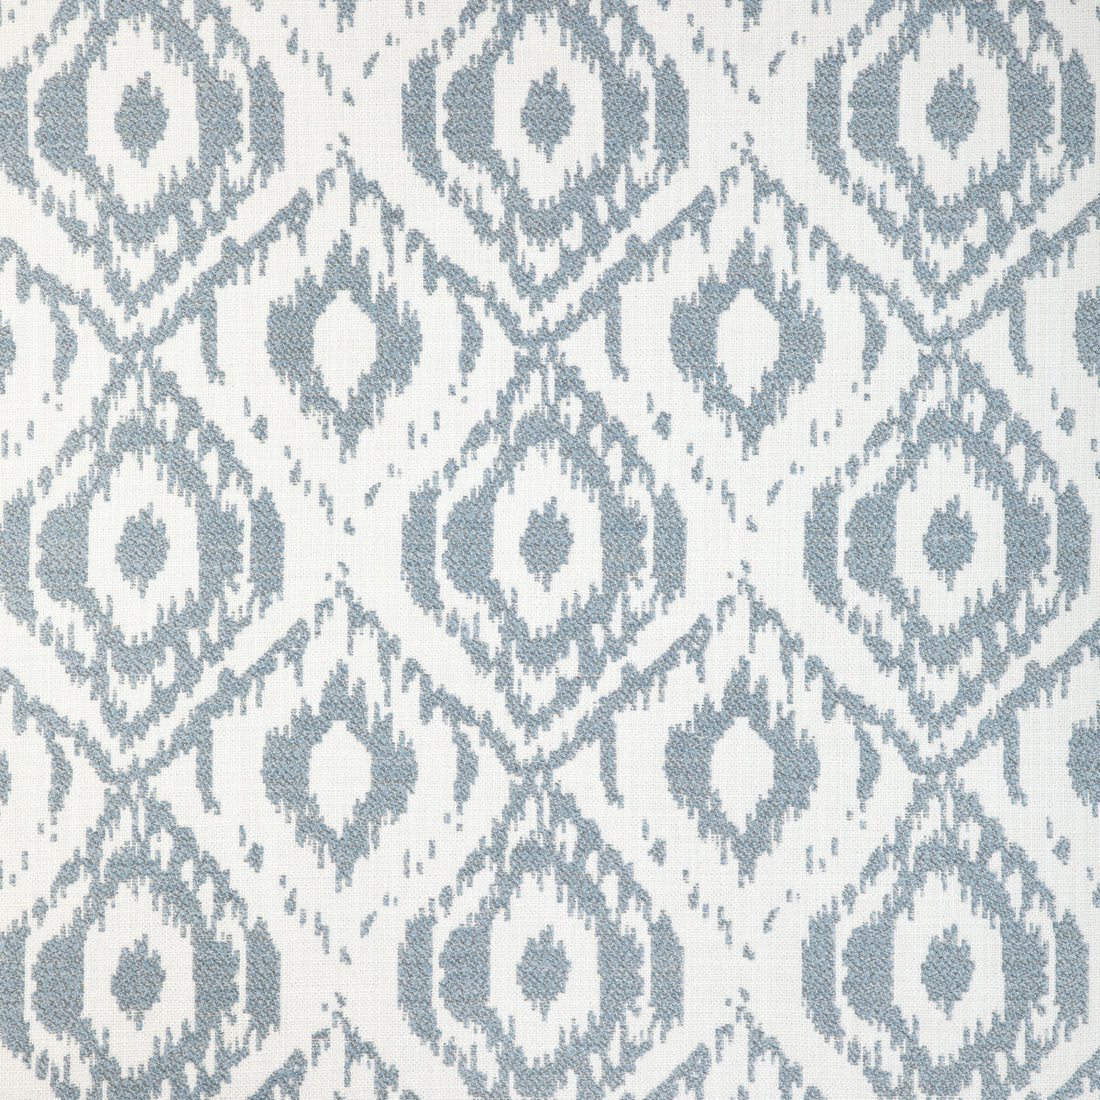 Milos Damask fabric in sky color - pattern 36921.15.0 - by Kravet Couture in the Riviera collection